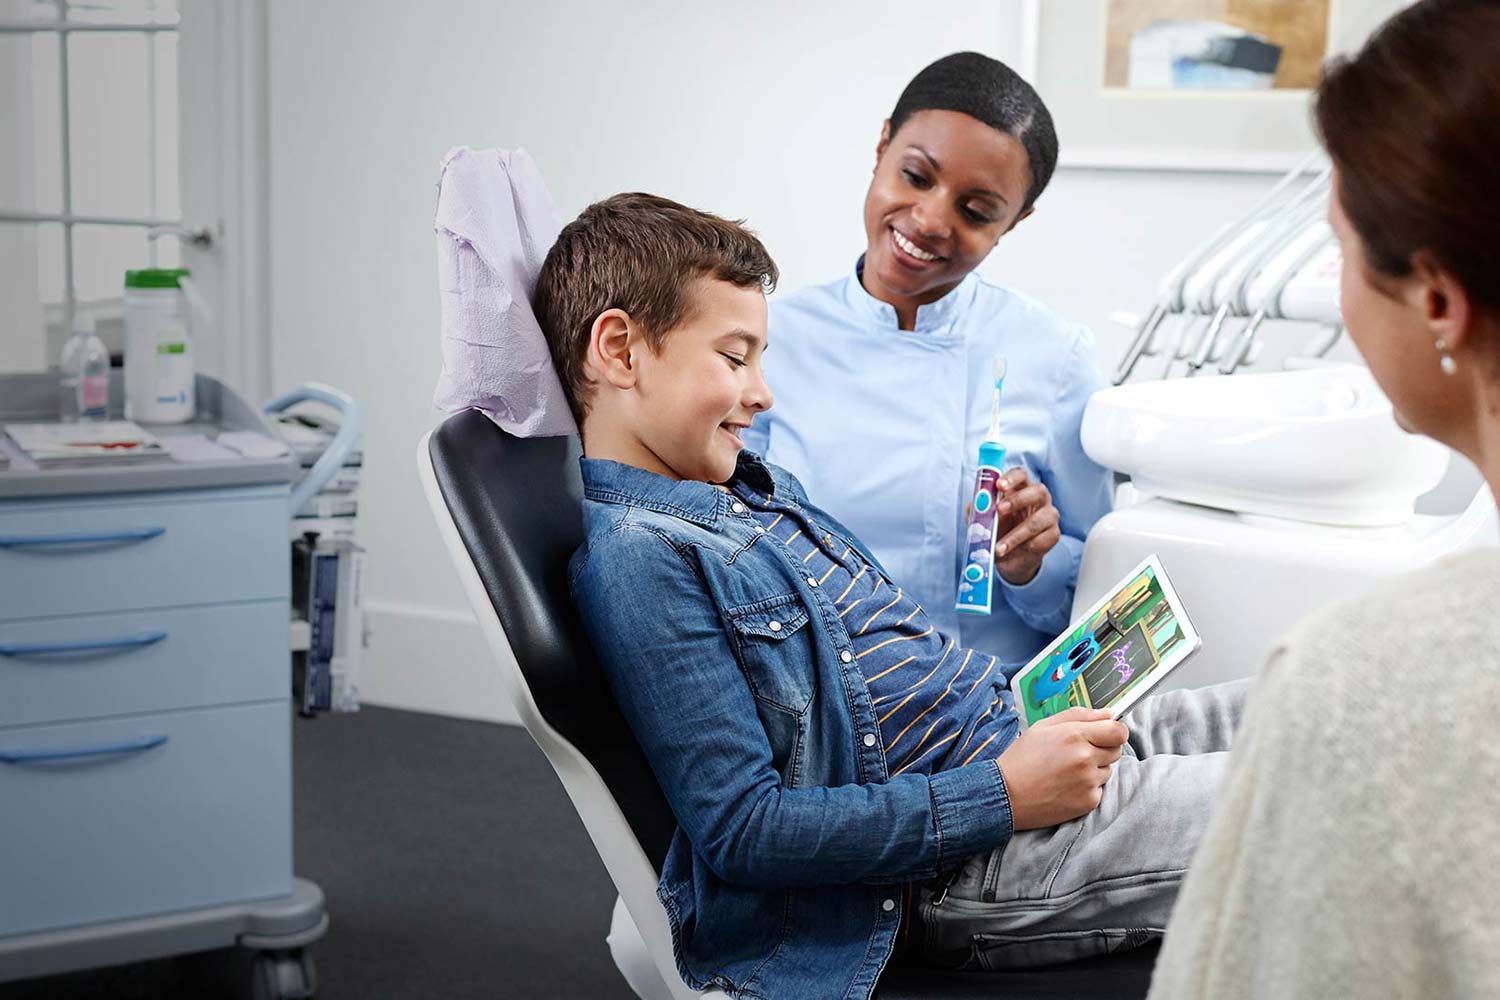 philips sonicare bluetooth toothbrush has a coaching app for kids connected usp4 02